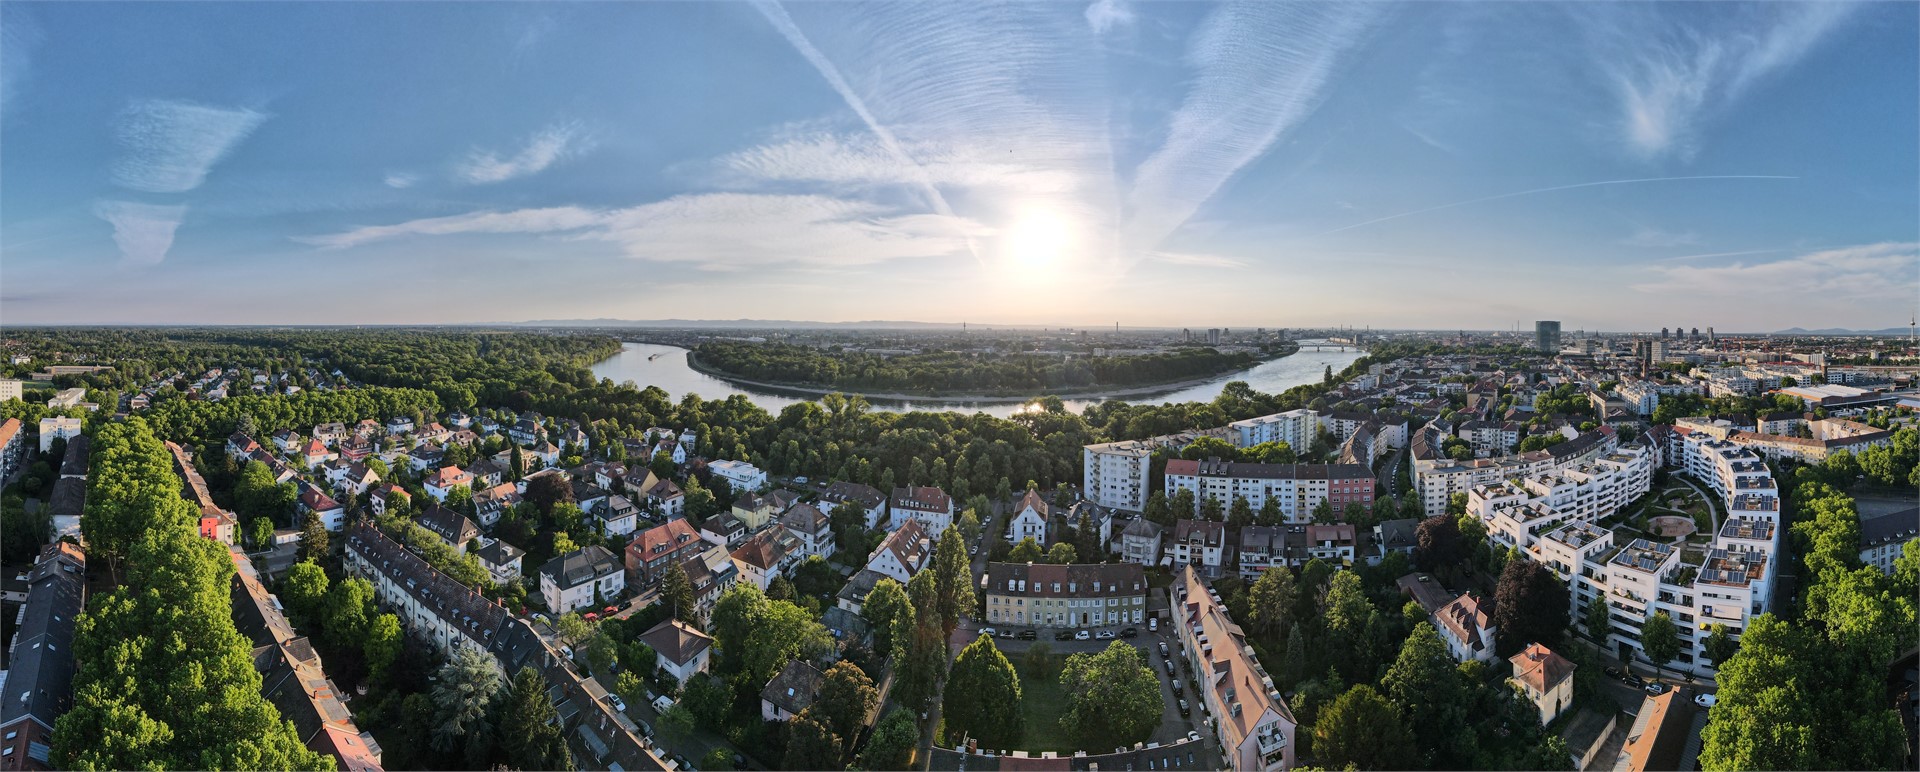 Hotels and accommodation in Mannheim, Germany